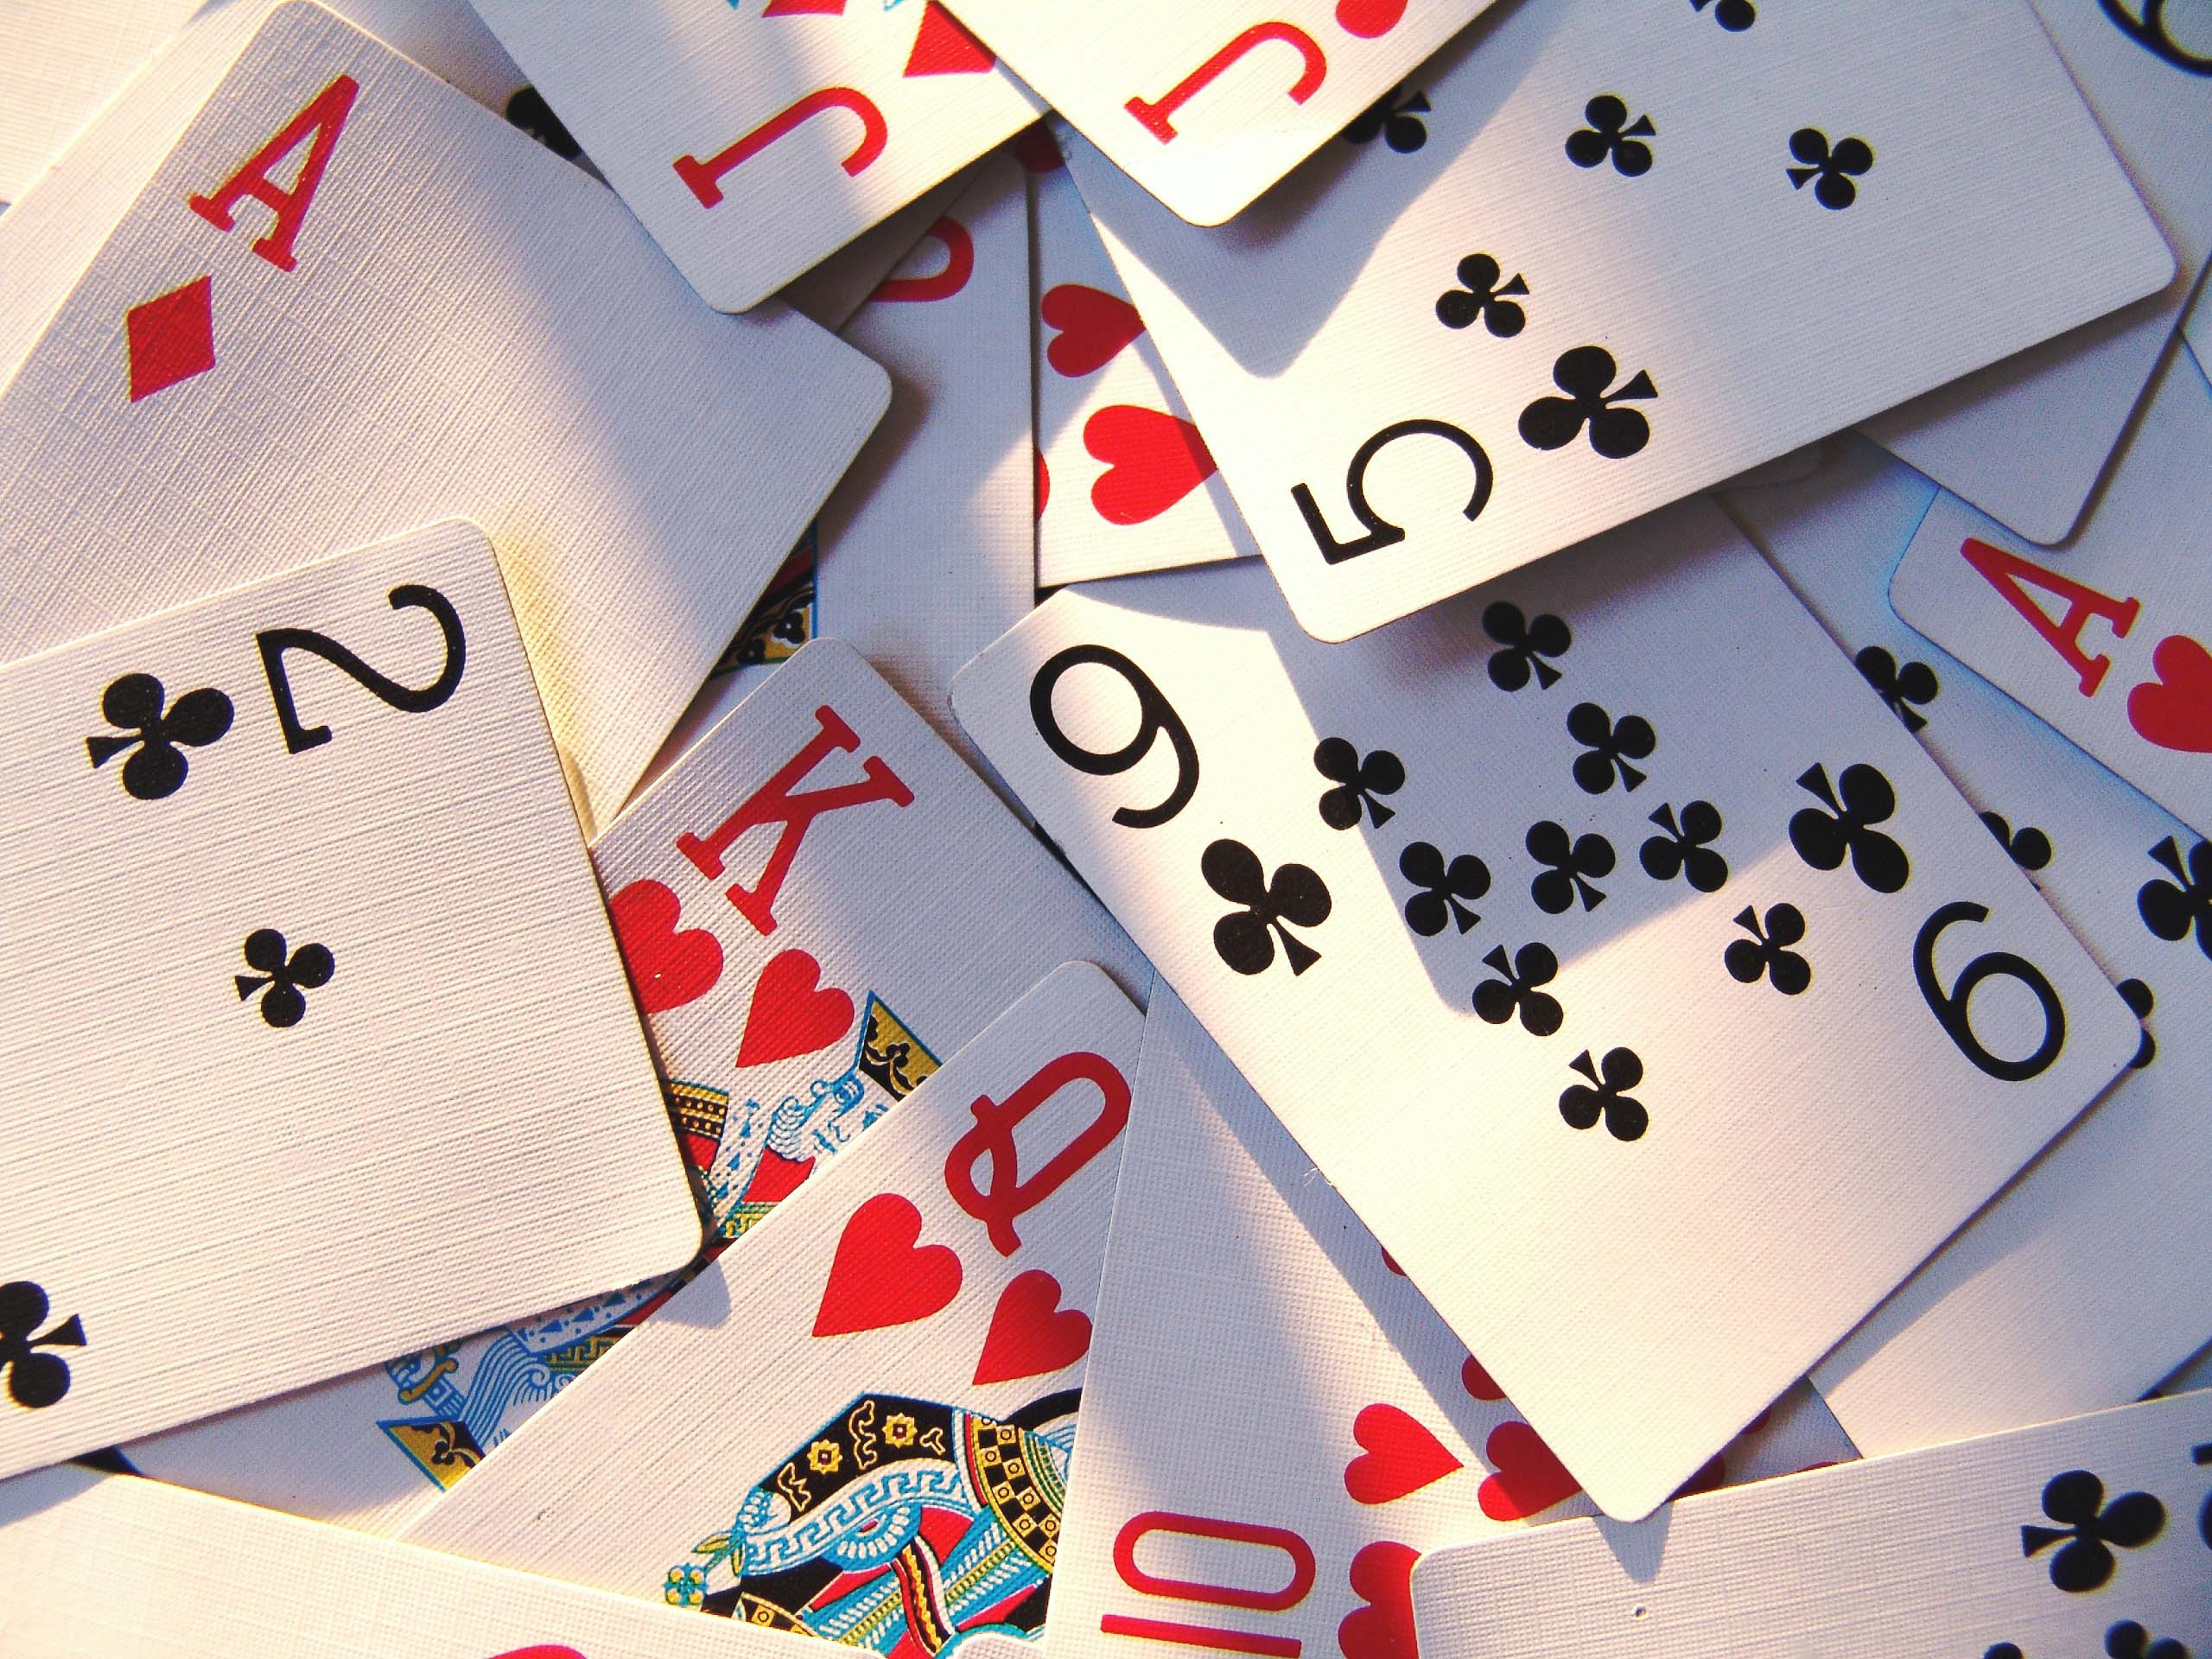 Would you like to play Canasta with like-minded folk at Menai Library? Join our weekly Canasta group. All equipment provided.